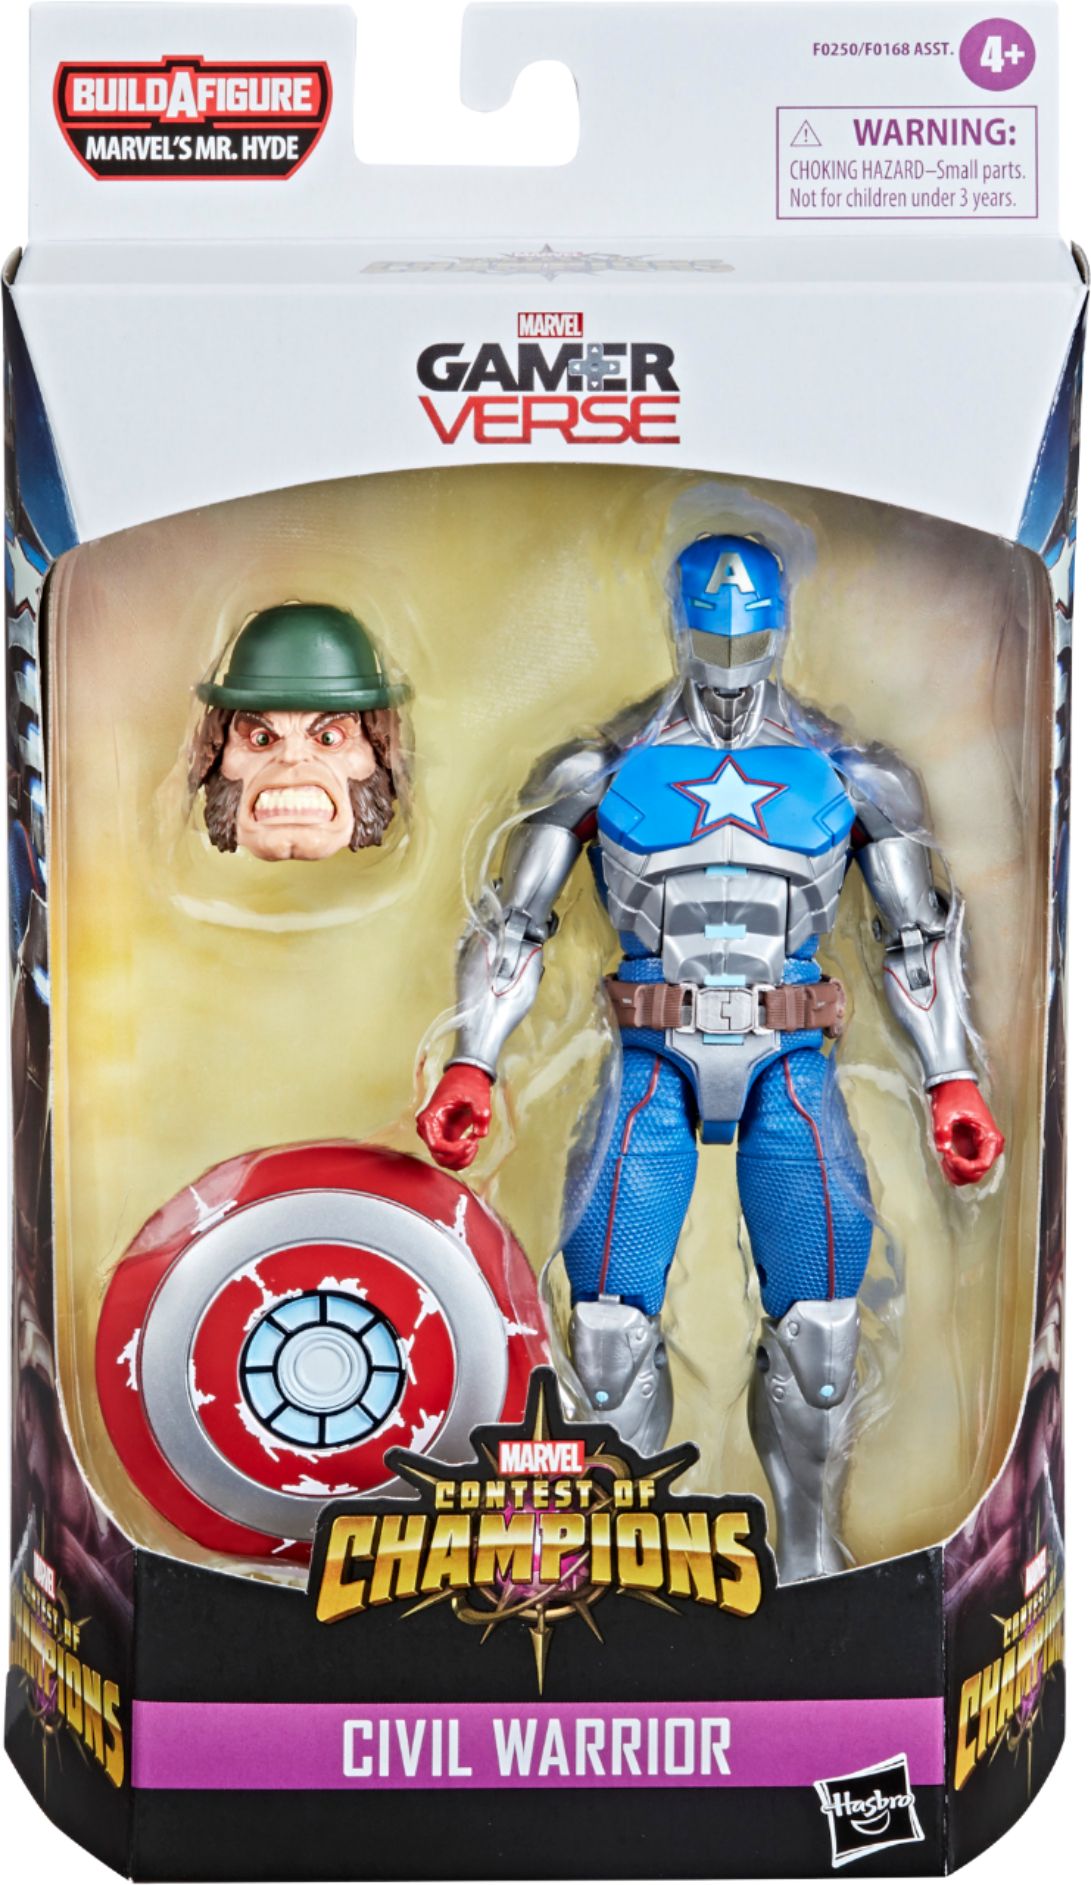 MARVEL GAMER VERSE CAPTAIN AMERICA CIVIL WARRIOR & THE COLLECTOR FIGURE 2 PACK 